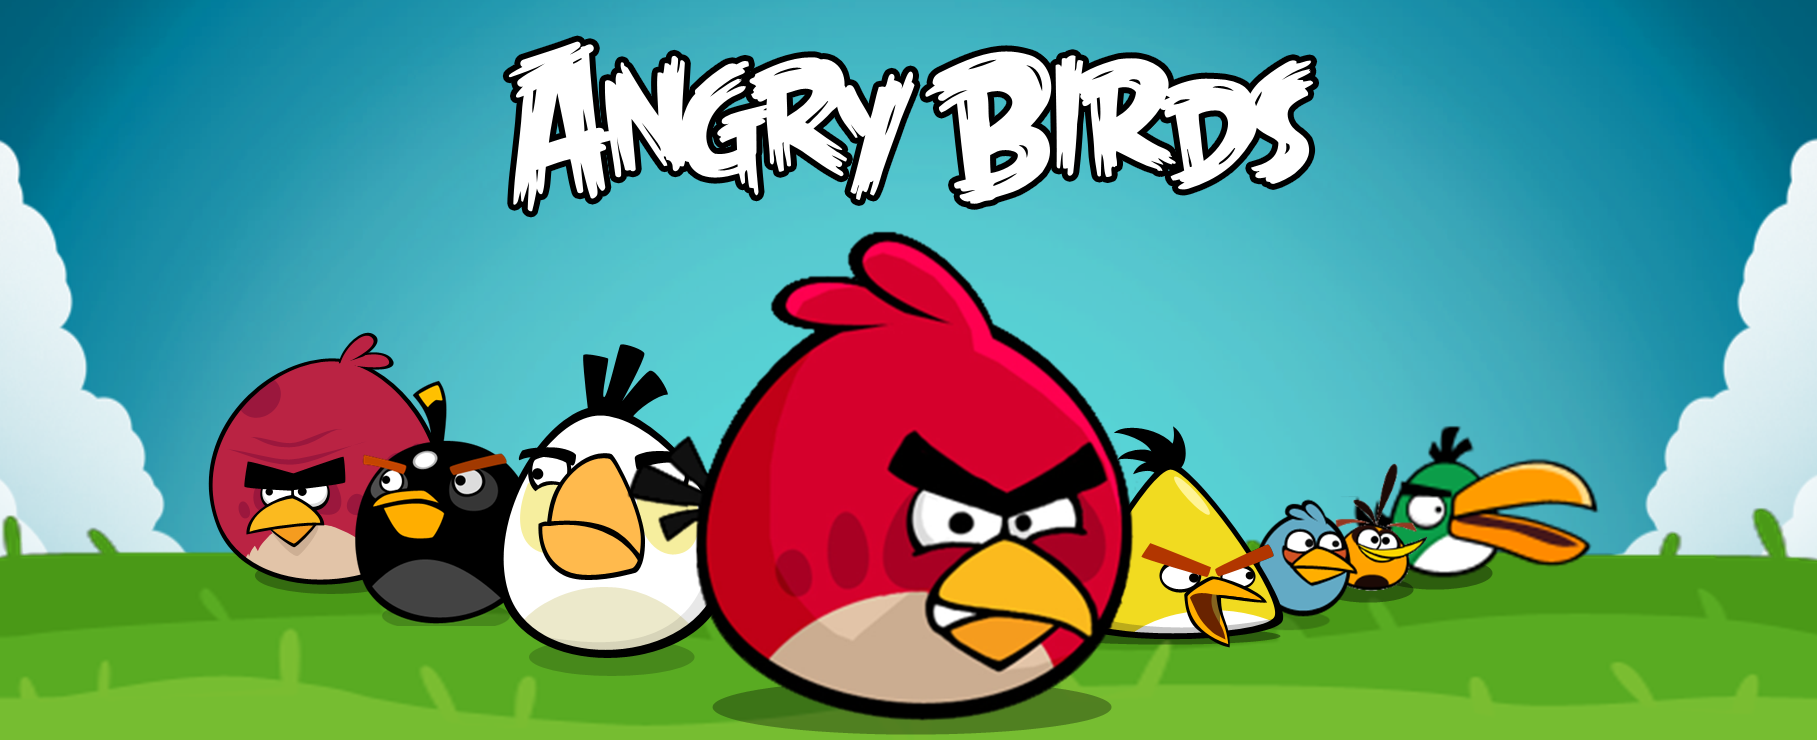 Image - Angry birds wallpaper 3.png - Angry Birds Wiki